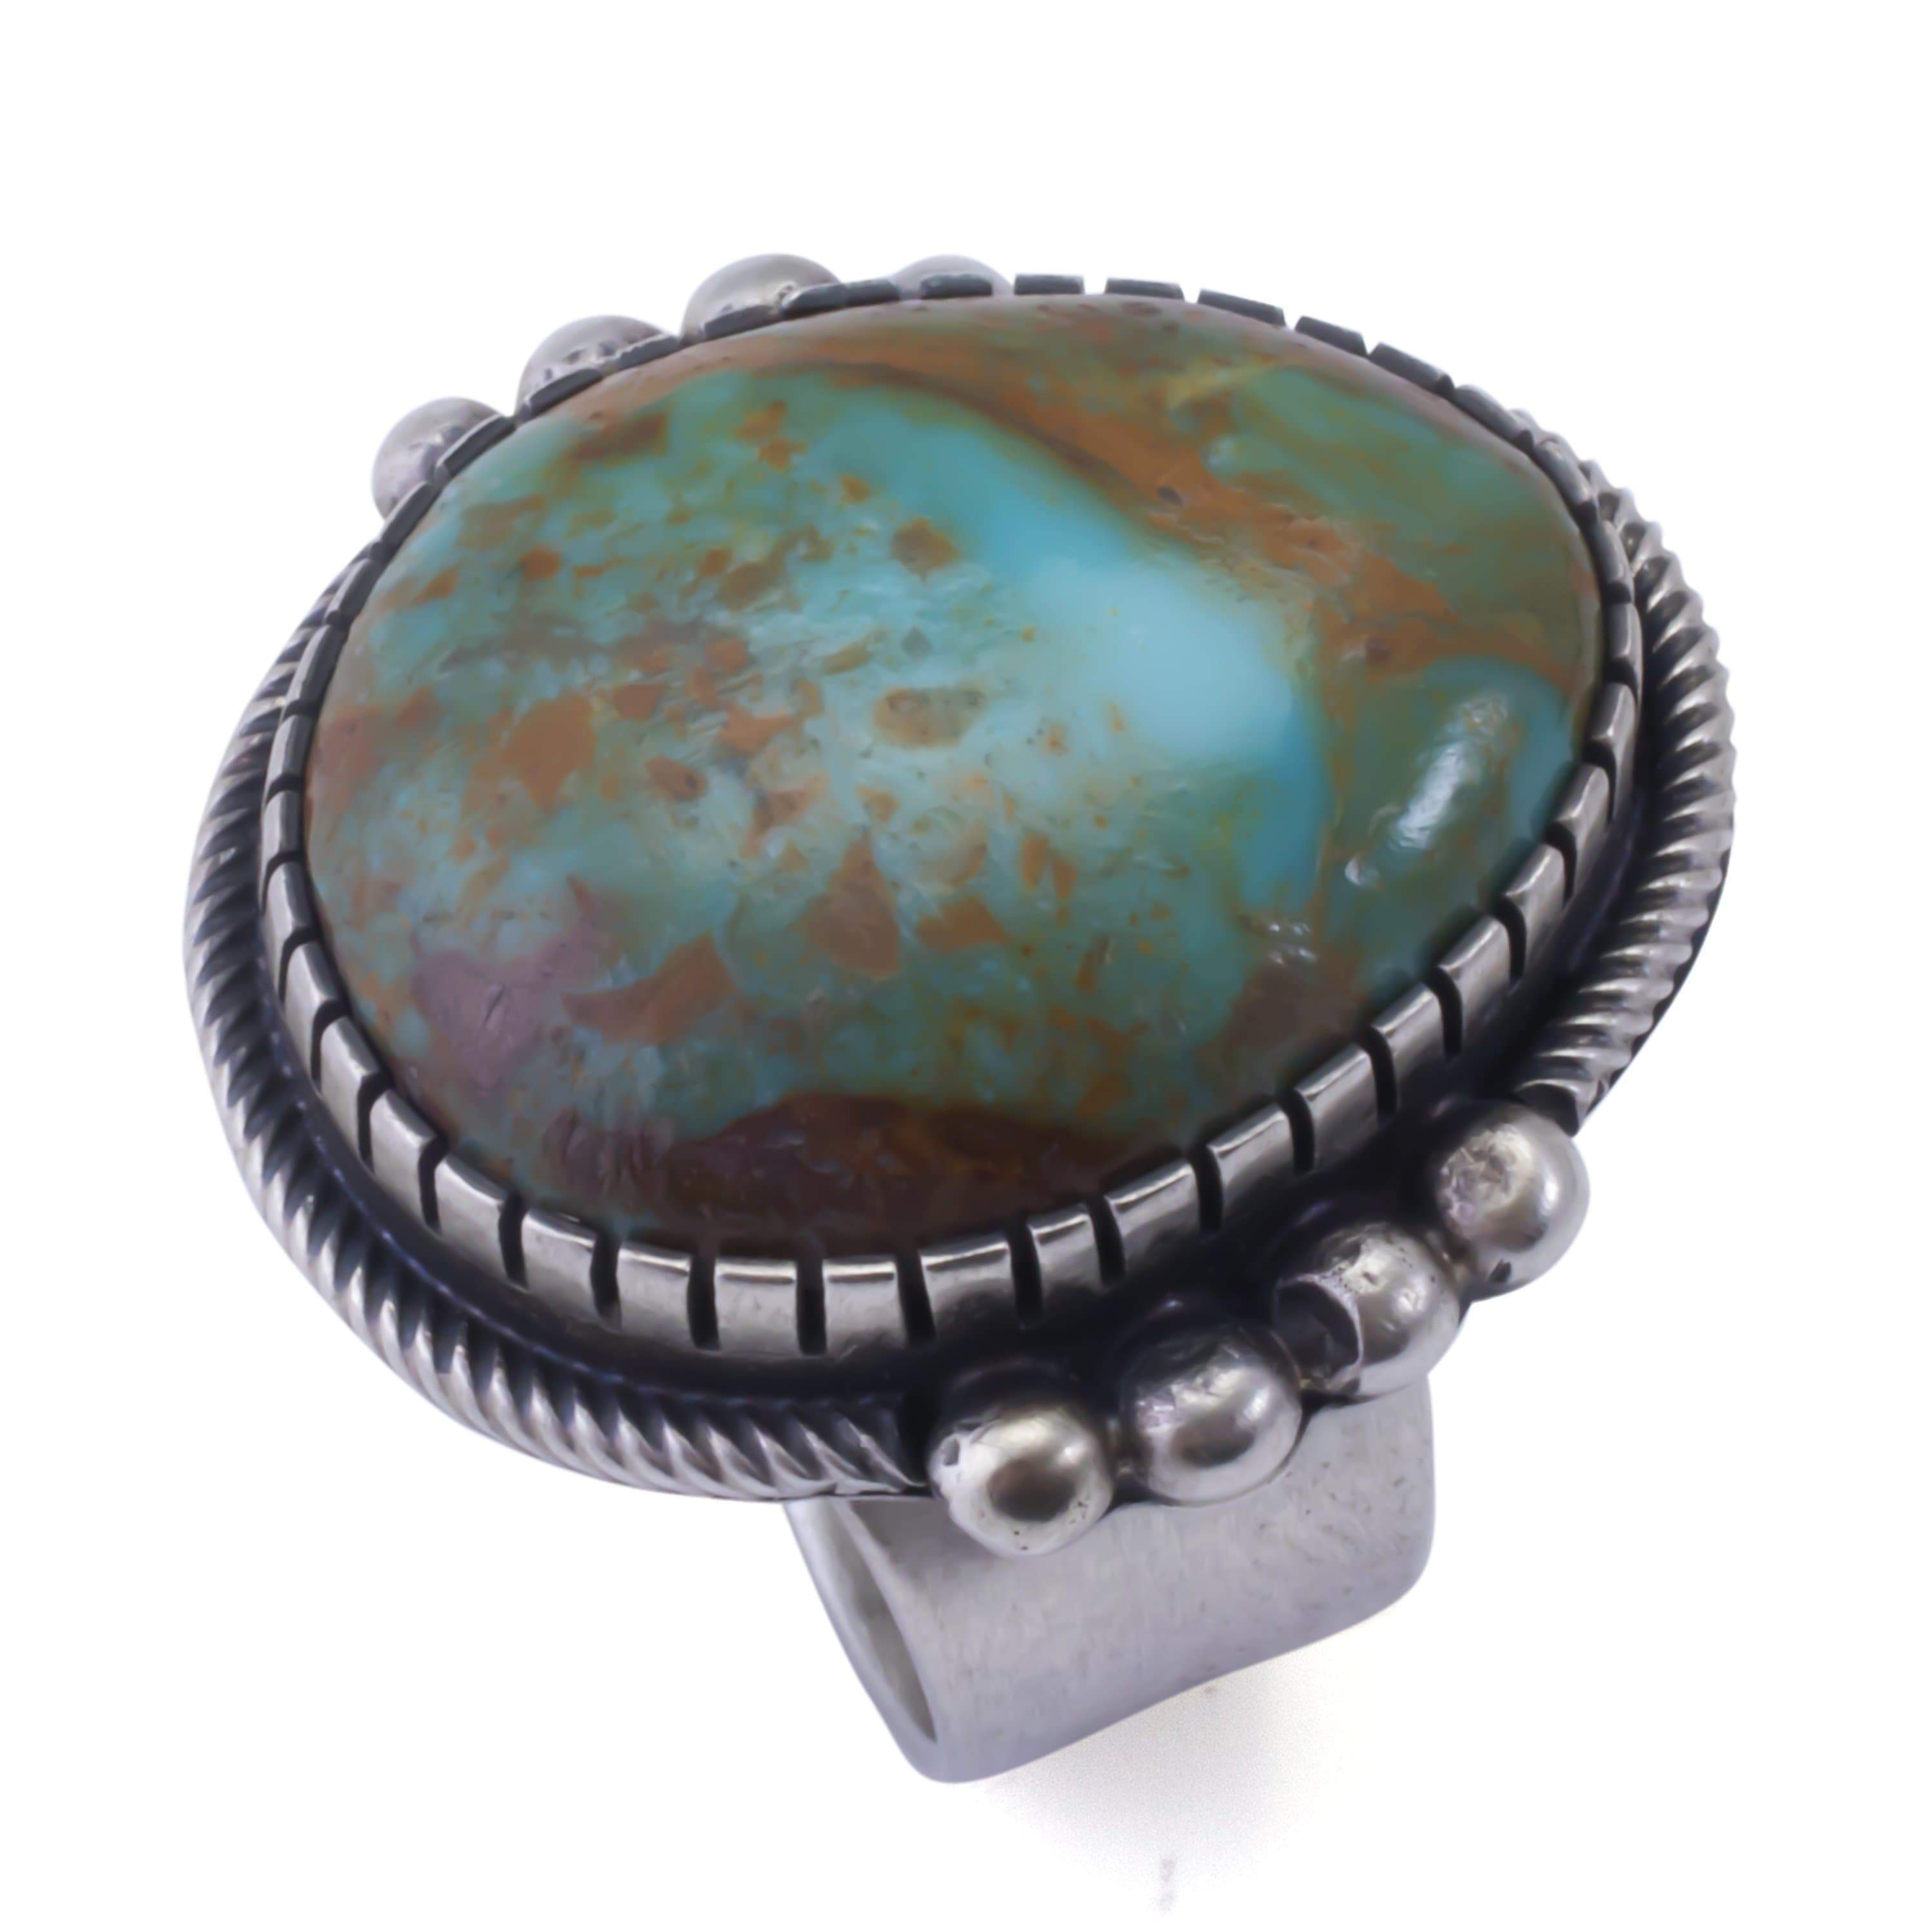 Kalifano Native American Jewelry Paul Livingston Kingman Turquoise Native American Made 925 Sterling Silver Ring